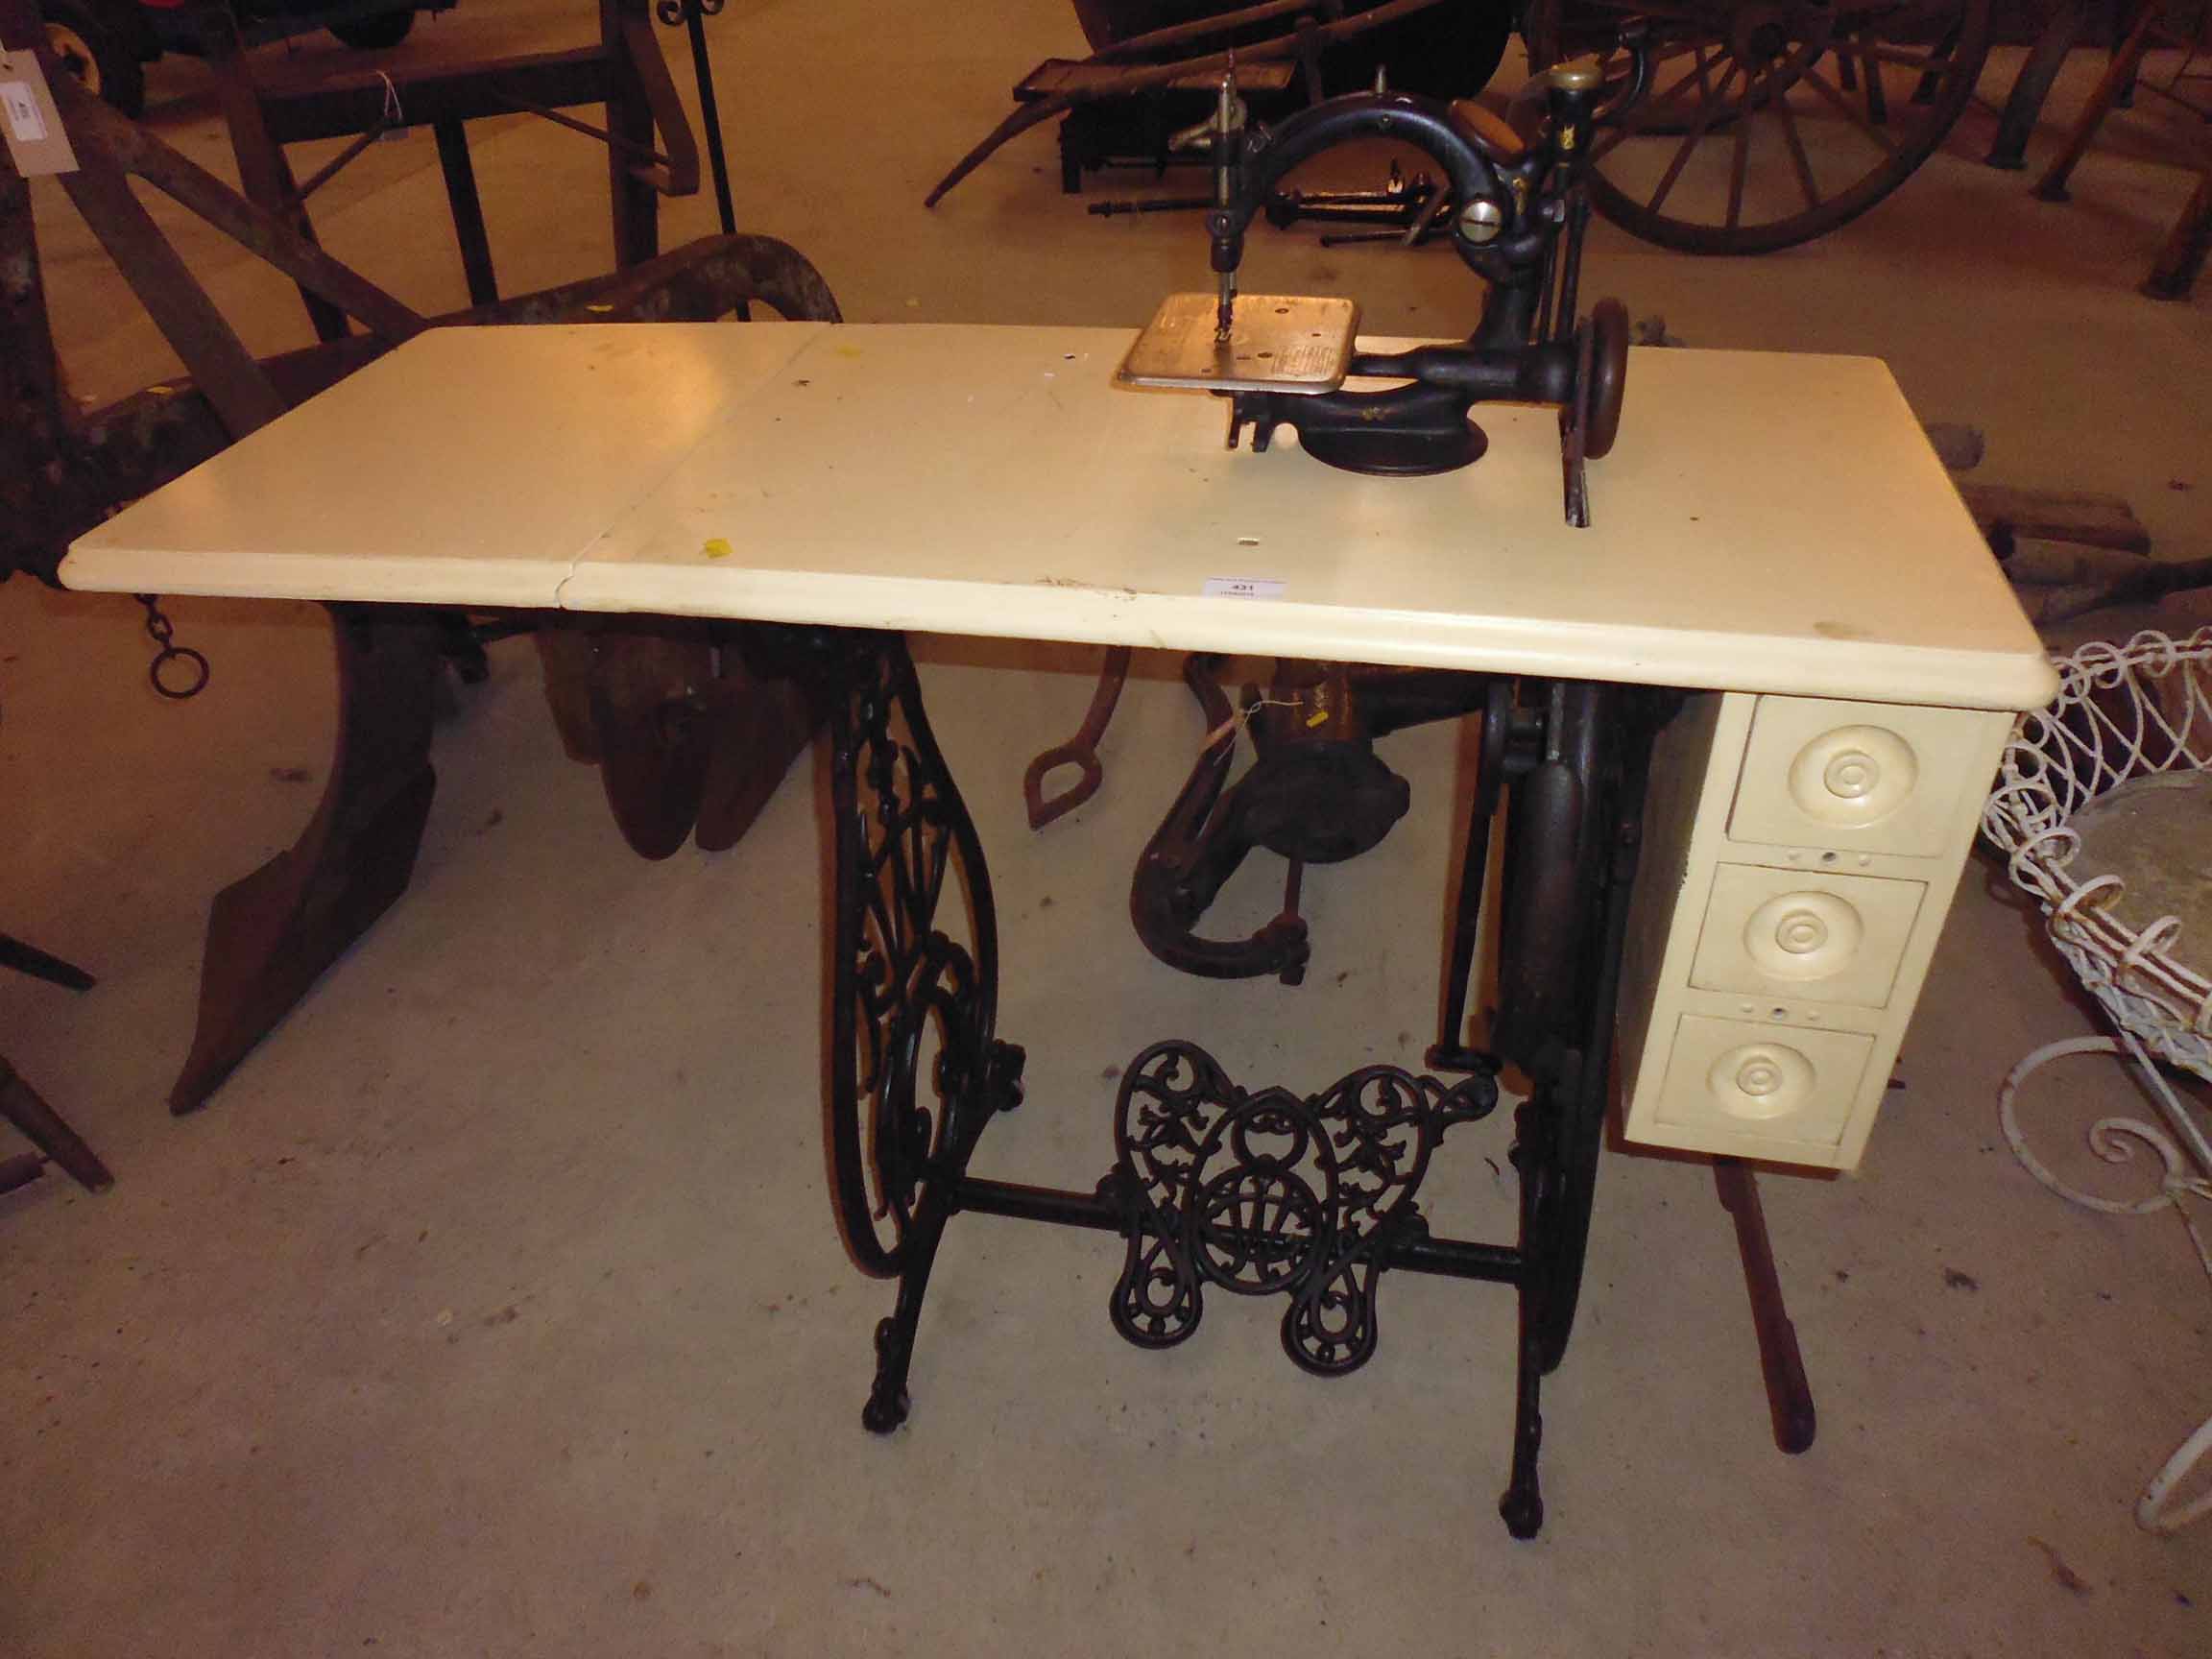 A late 1800's Willcox & Gibbs treadle operated sewing machine, complete with the original